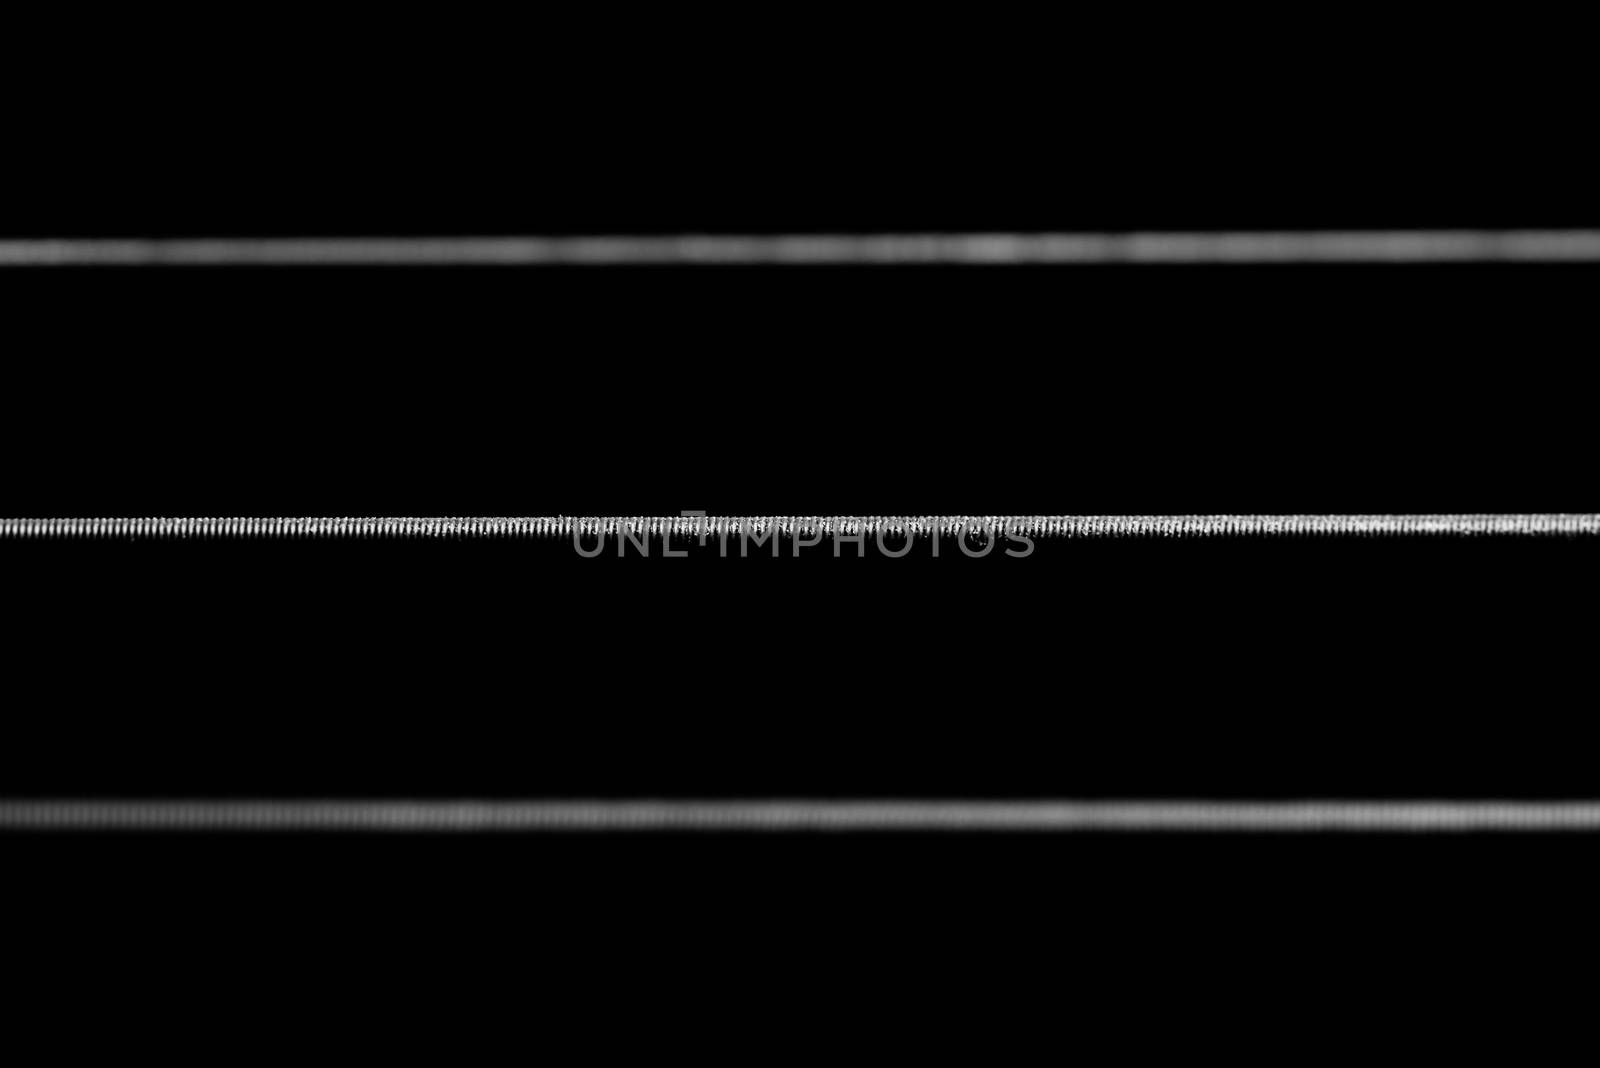 A dramatic 1:1 macro shot of acoustic guitar strings framed horizontally across the frame in black and white.